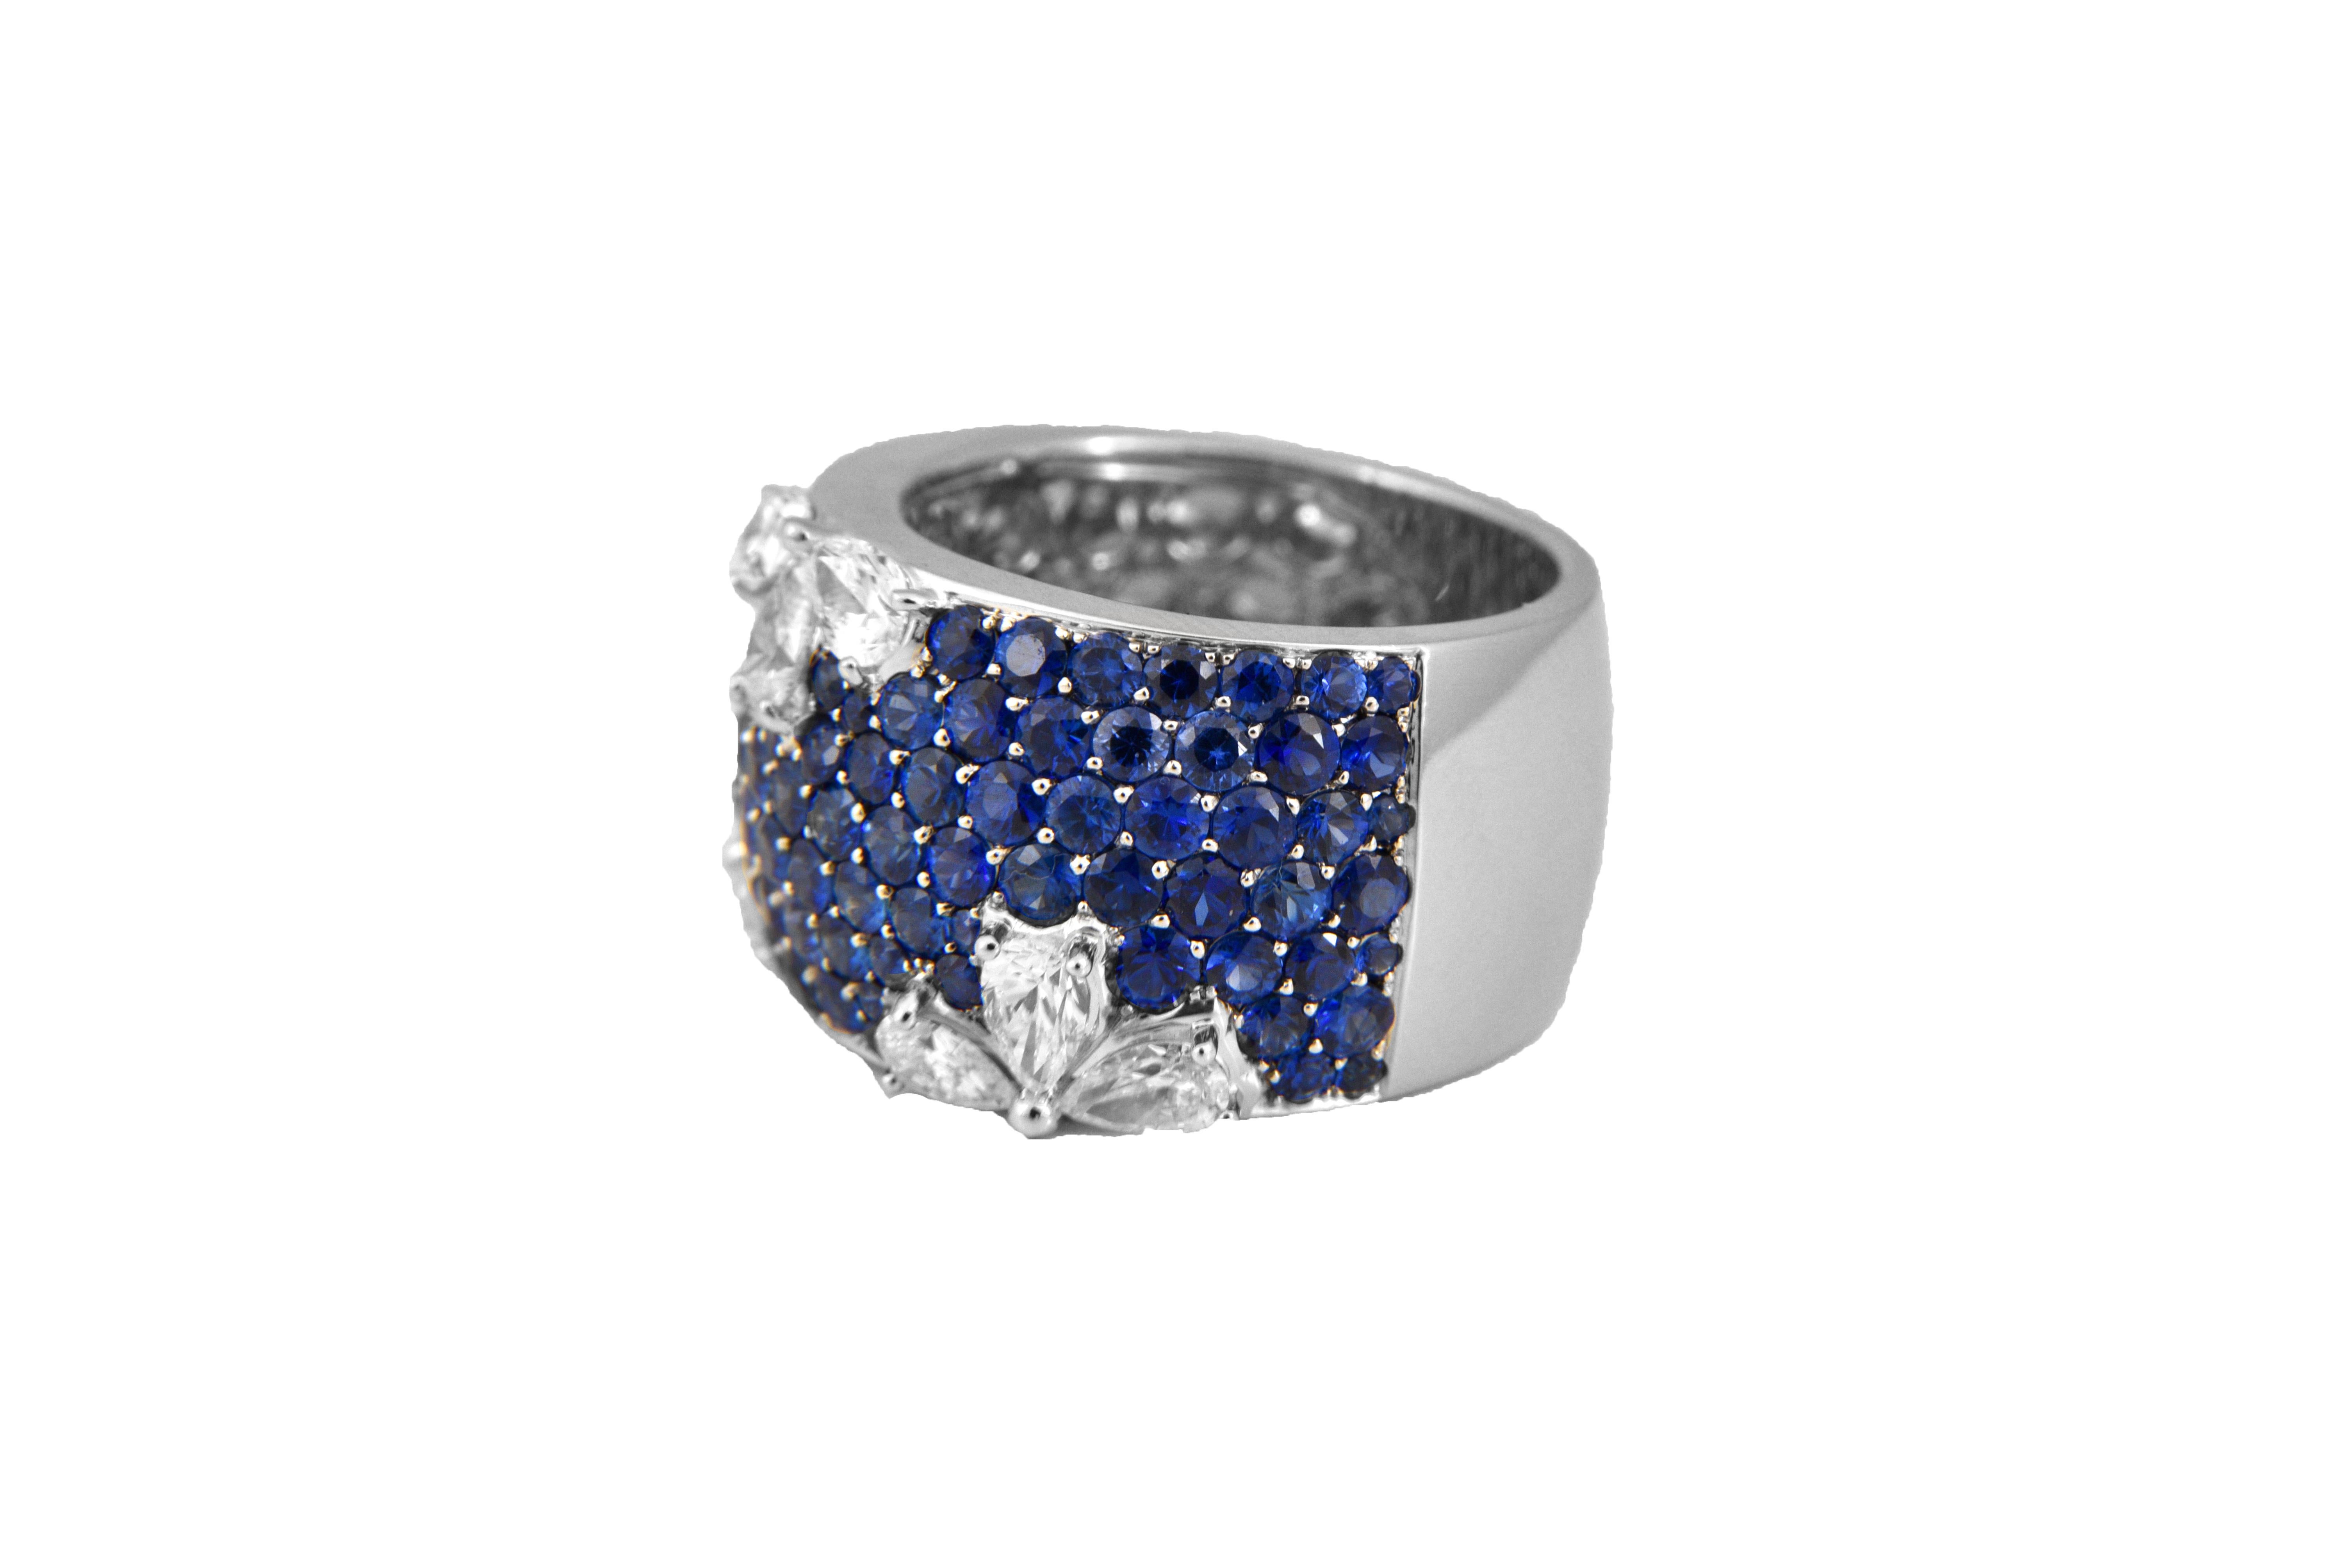 This cute ring is sure to turn heads with its 4.01 Carats of round sapphires and 1.28 Carats of Diamond. US size 6